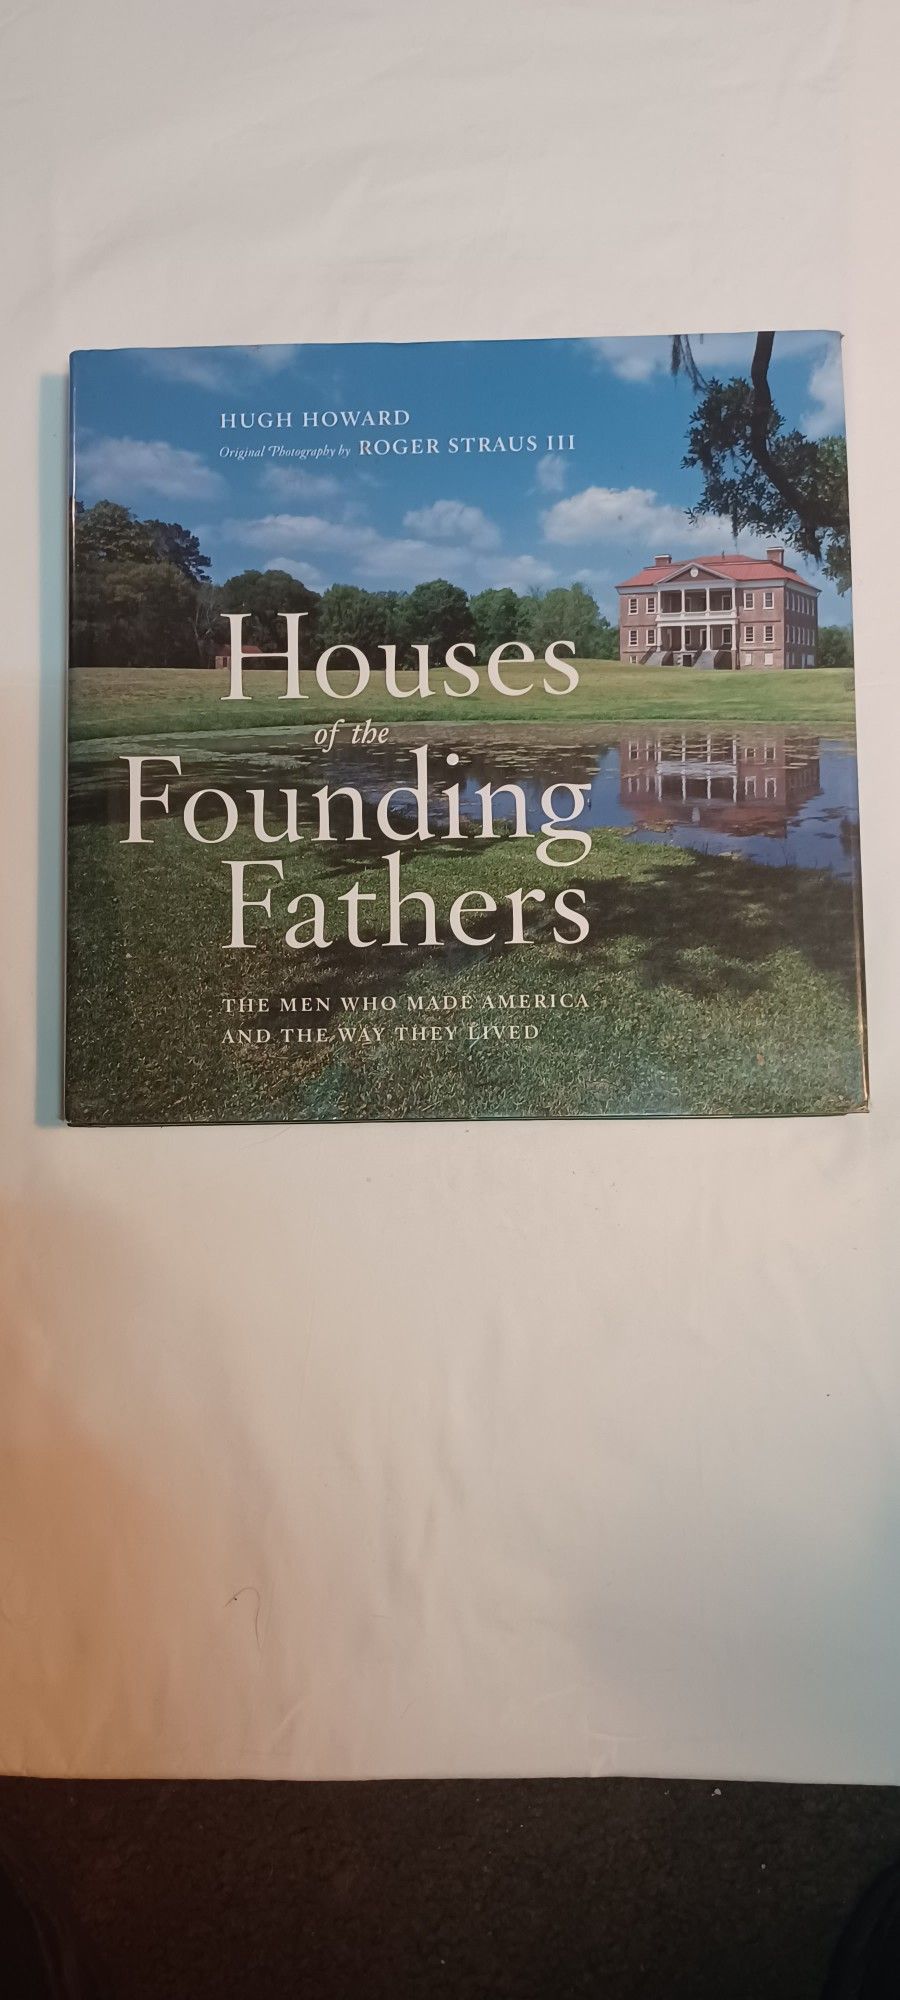 Houses of the Founding Fathers Hardcover – November 6, 2007

by Hugh Howard  (Author), Roger Straus III (Photographer)

